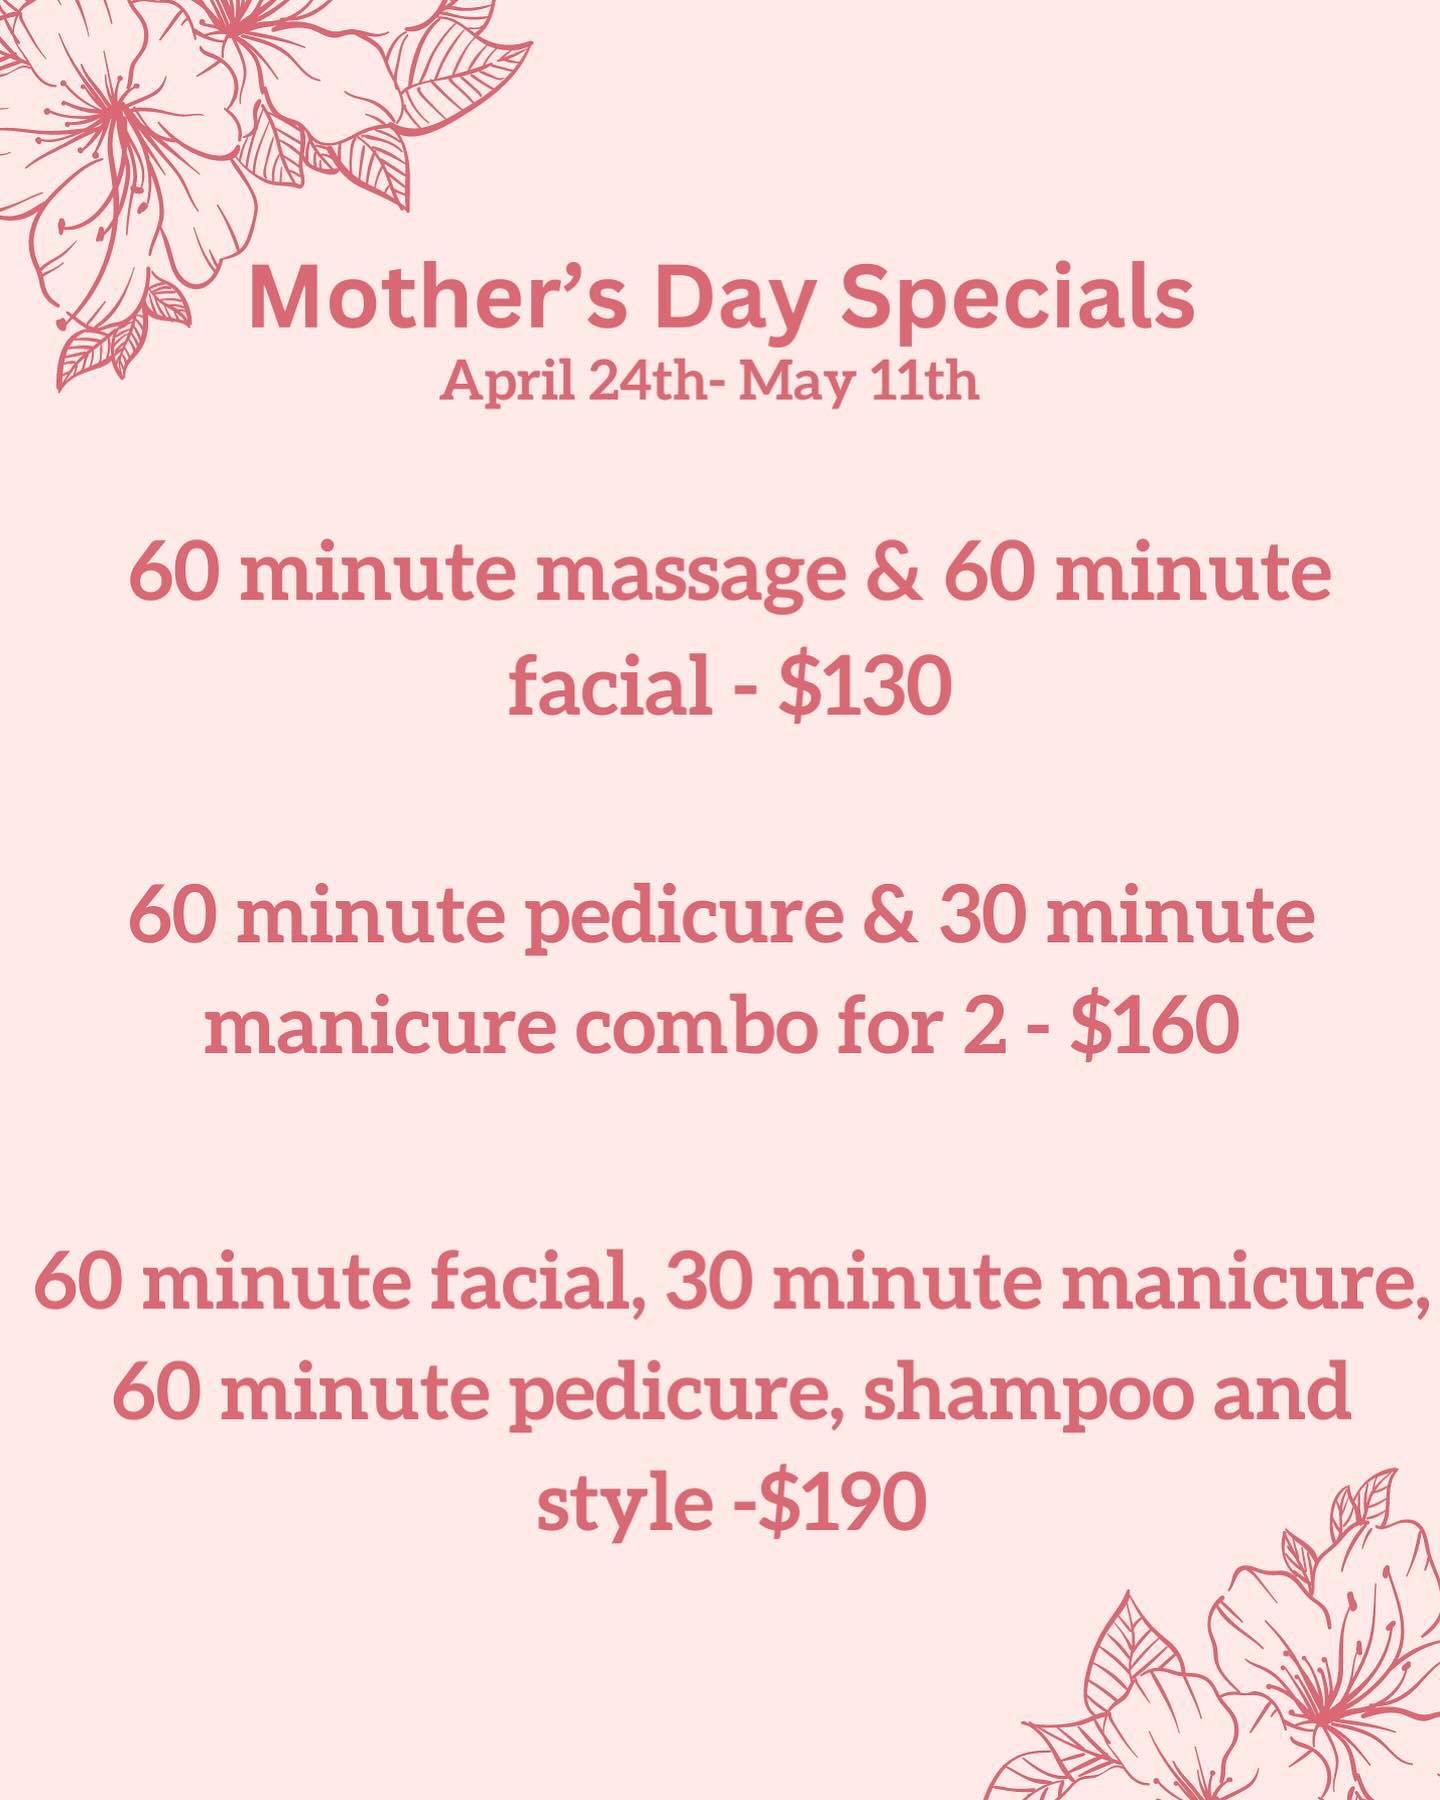 Mother&rsquo;s Day is coming quickly! Check out these awesome spa packages that every mother will love 💗 

Stop in today to purchase! 

&bull;Gift cards can be purchased for spa packages and used at a later date&bull;